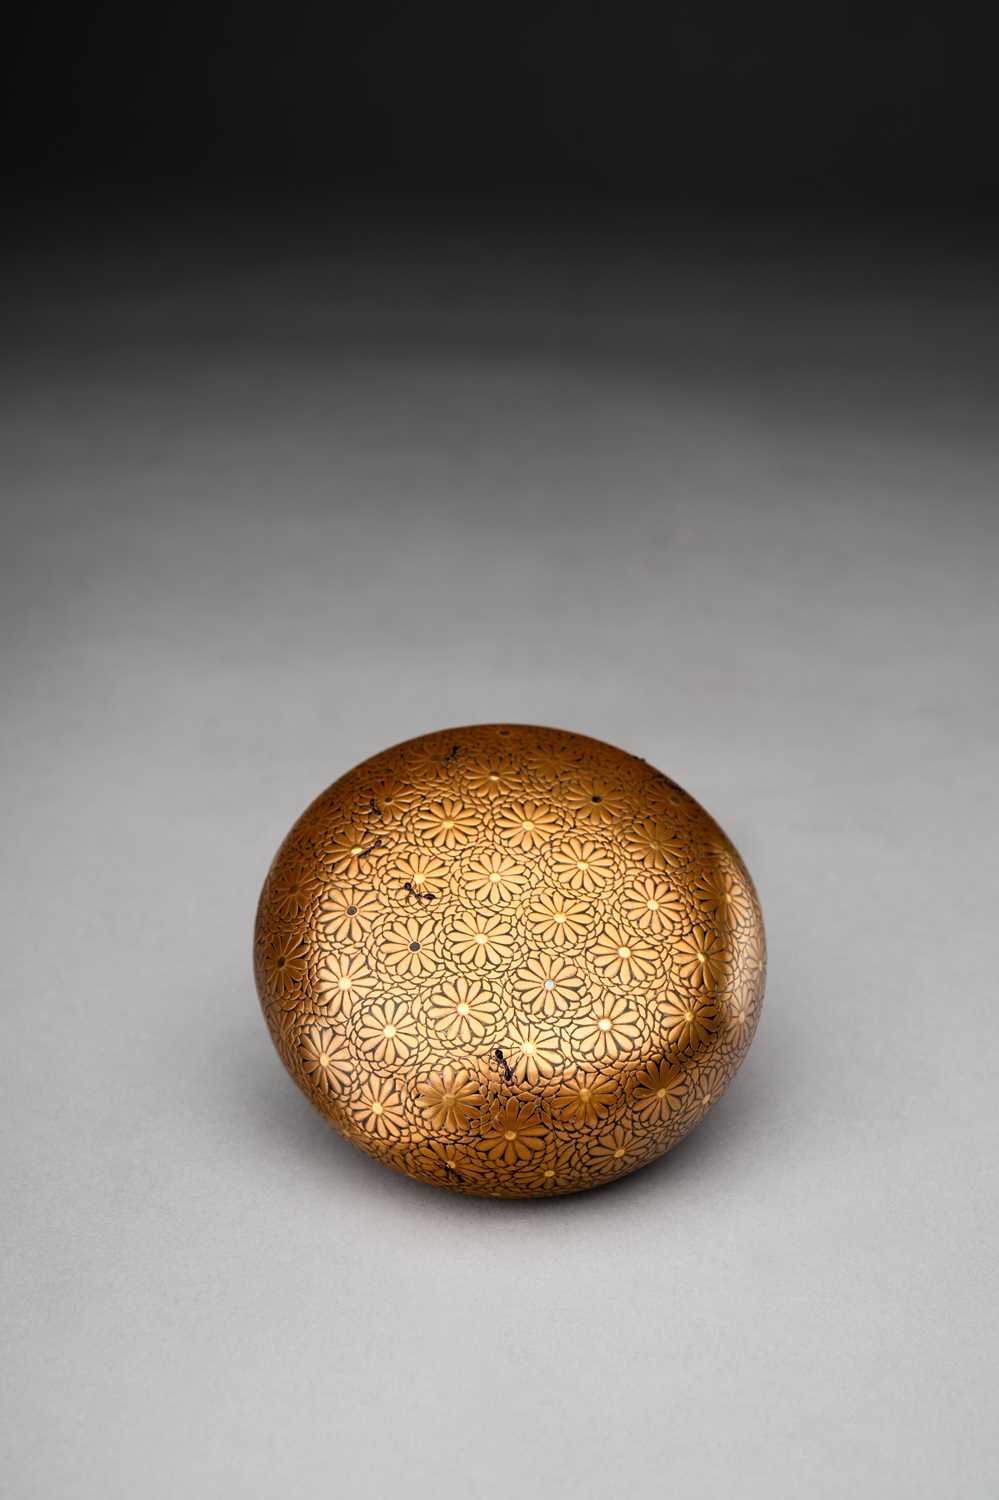 A FINE JAPANESE GOLD LACQUER KOGO (INCENSE BOX AND COVER) BY HARA YŌYŪSAI (1772-1845/6) EDO